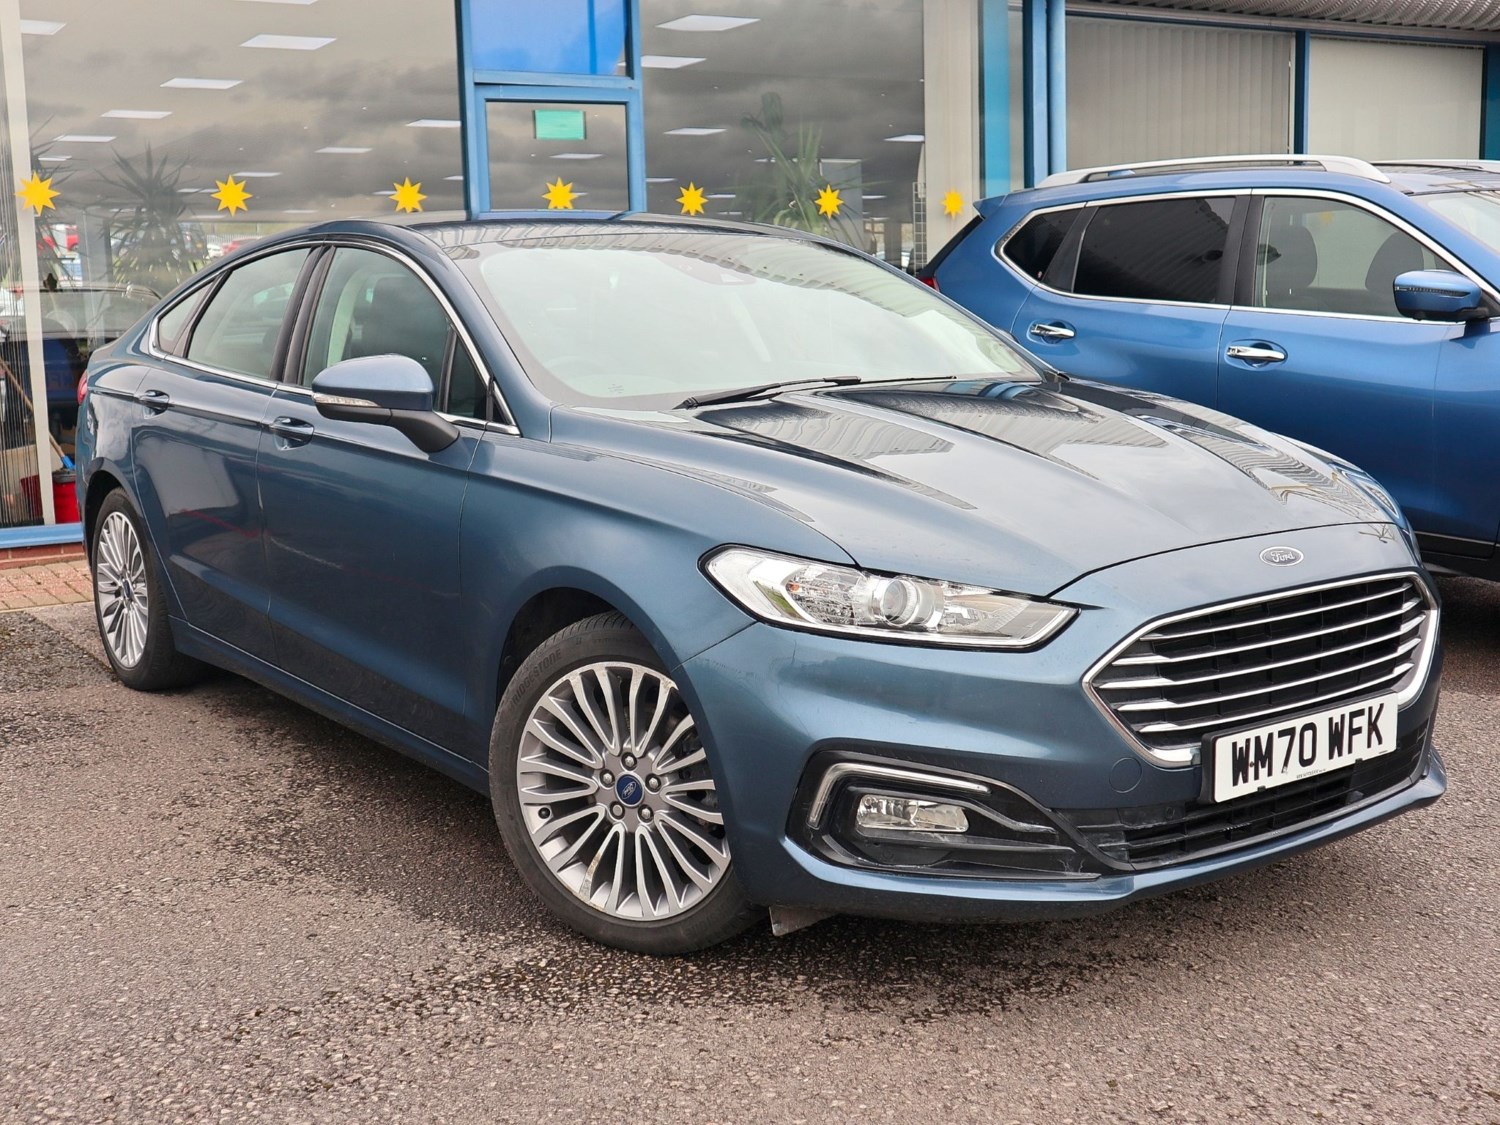 2021 used Ford Mondeo 2.0 Titanium Edition Ecoblue 5DR Hatch Diesel